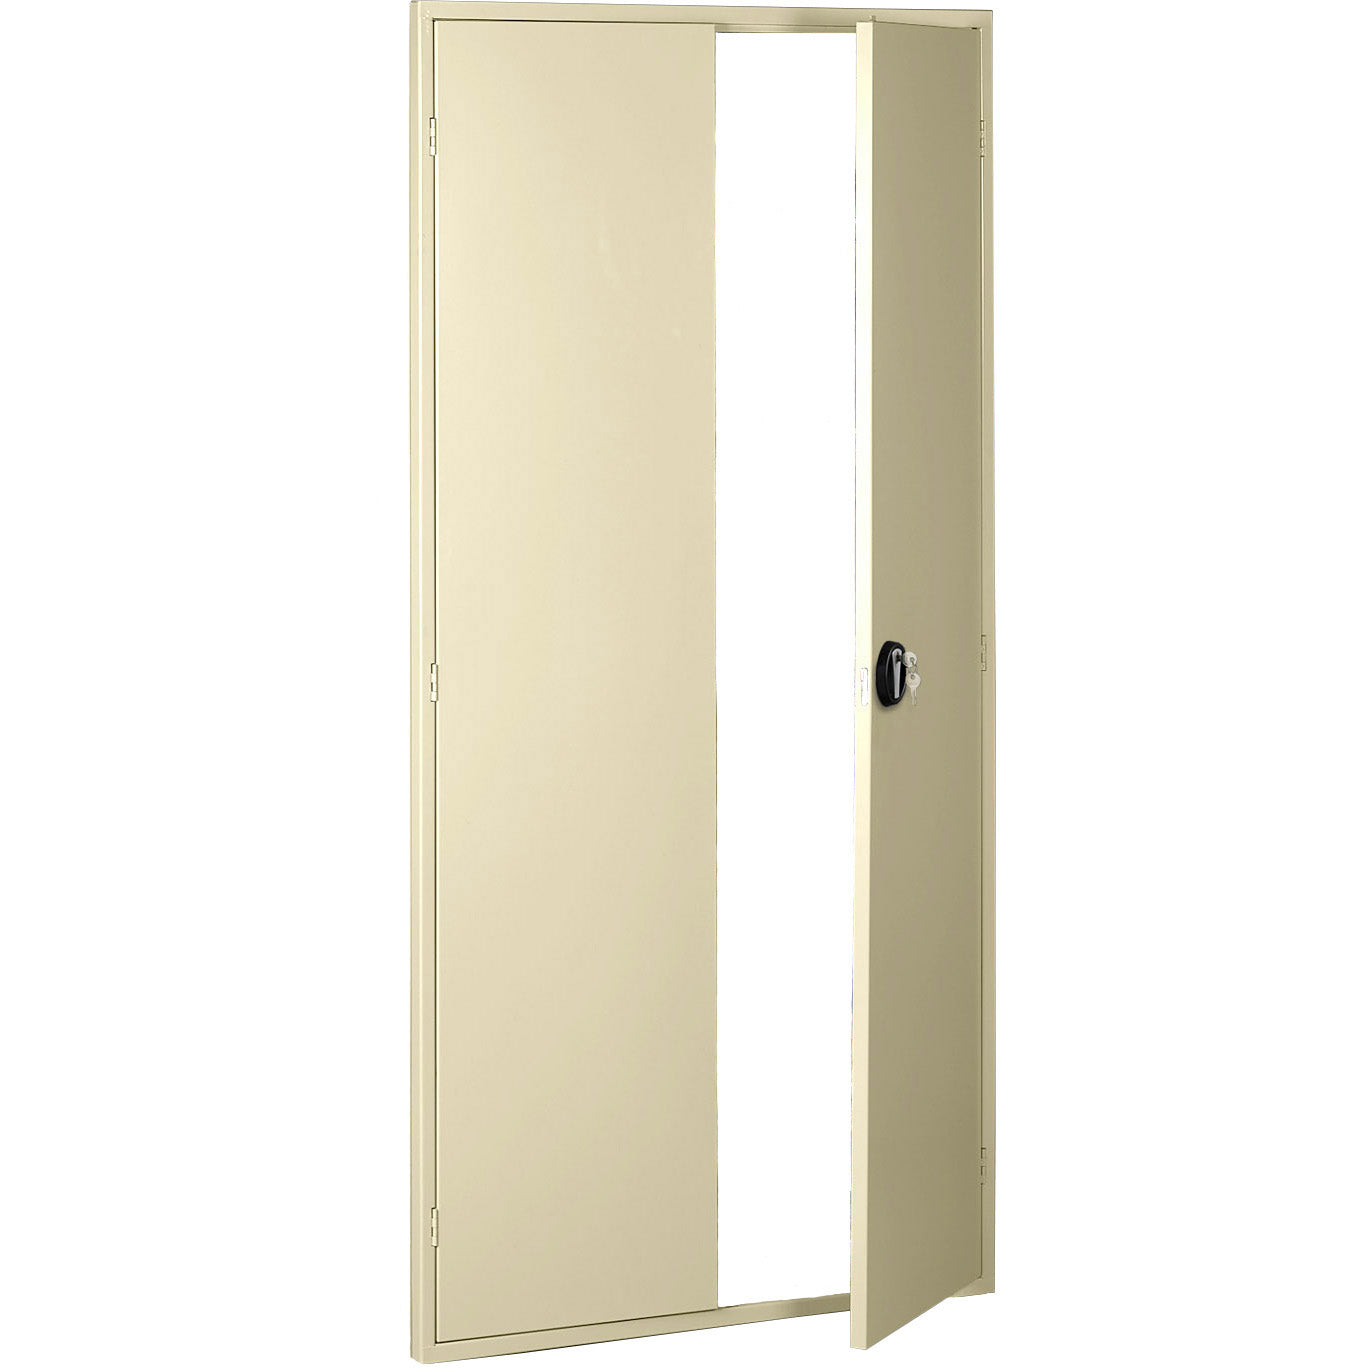 Tennsco Hinged Doors with Extended Frames for Imperial Shelving, LTHD-4876RHD